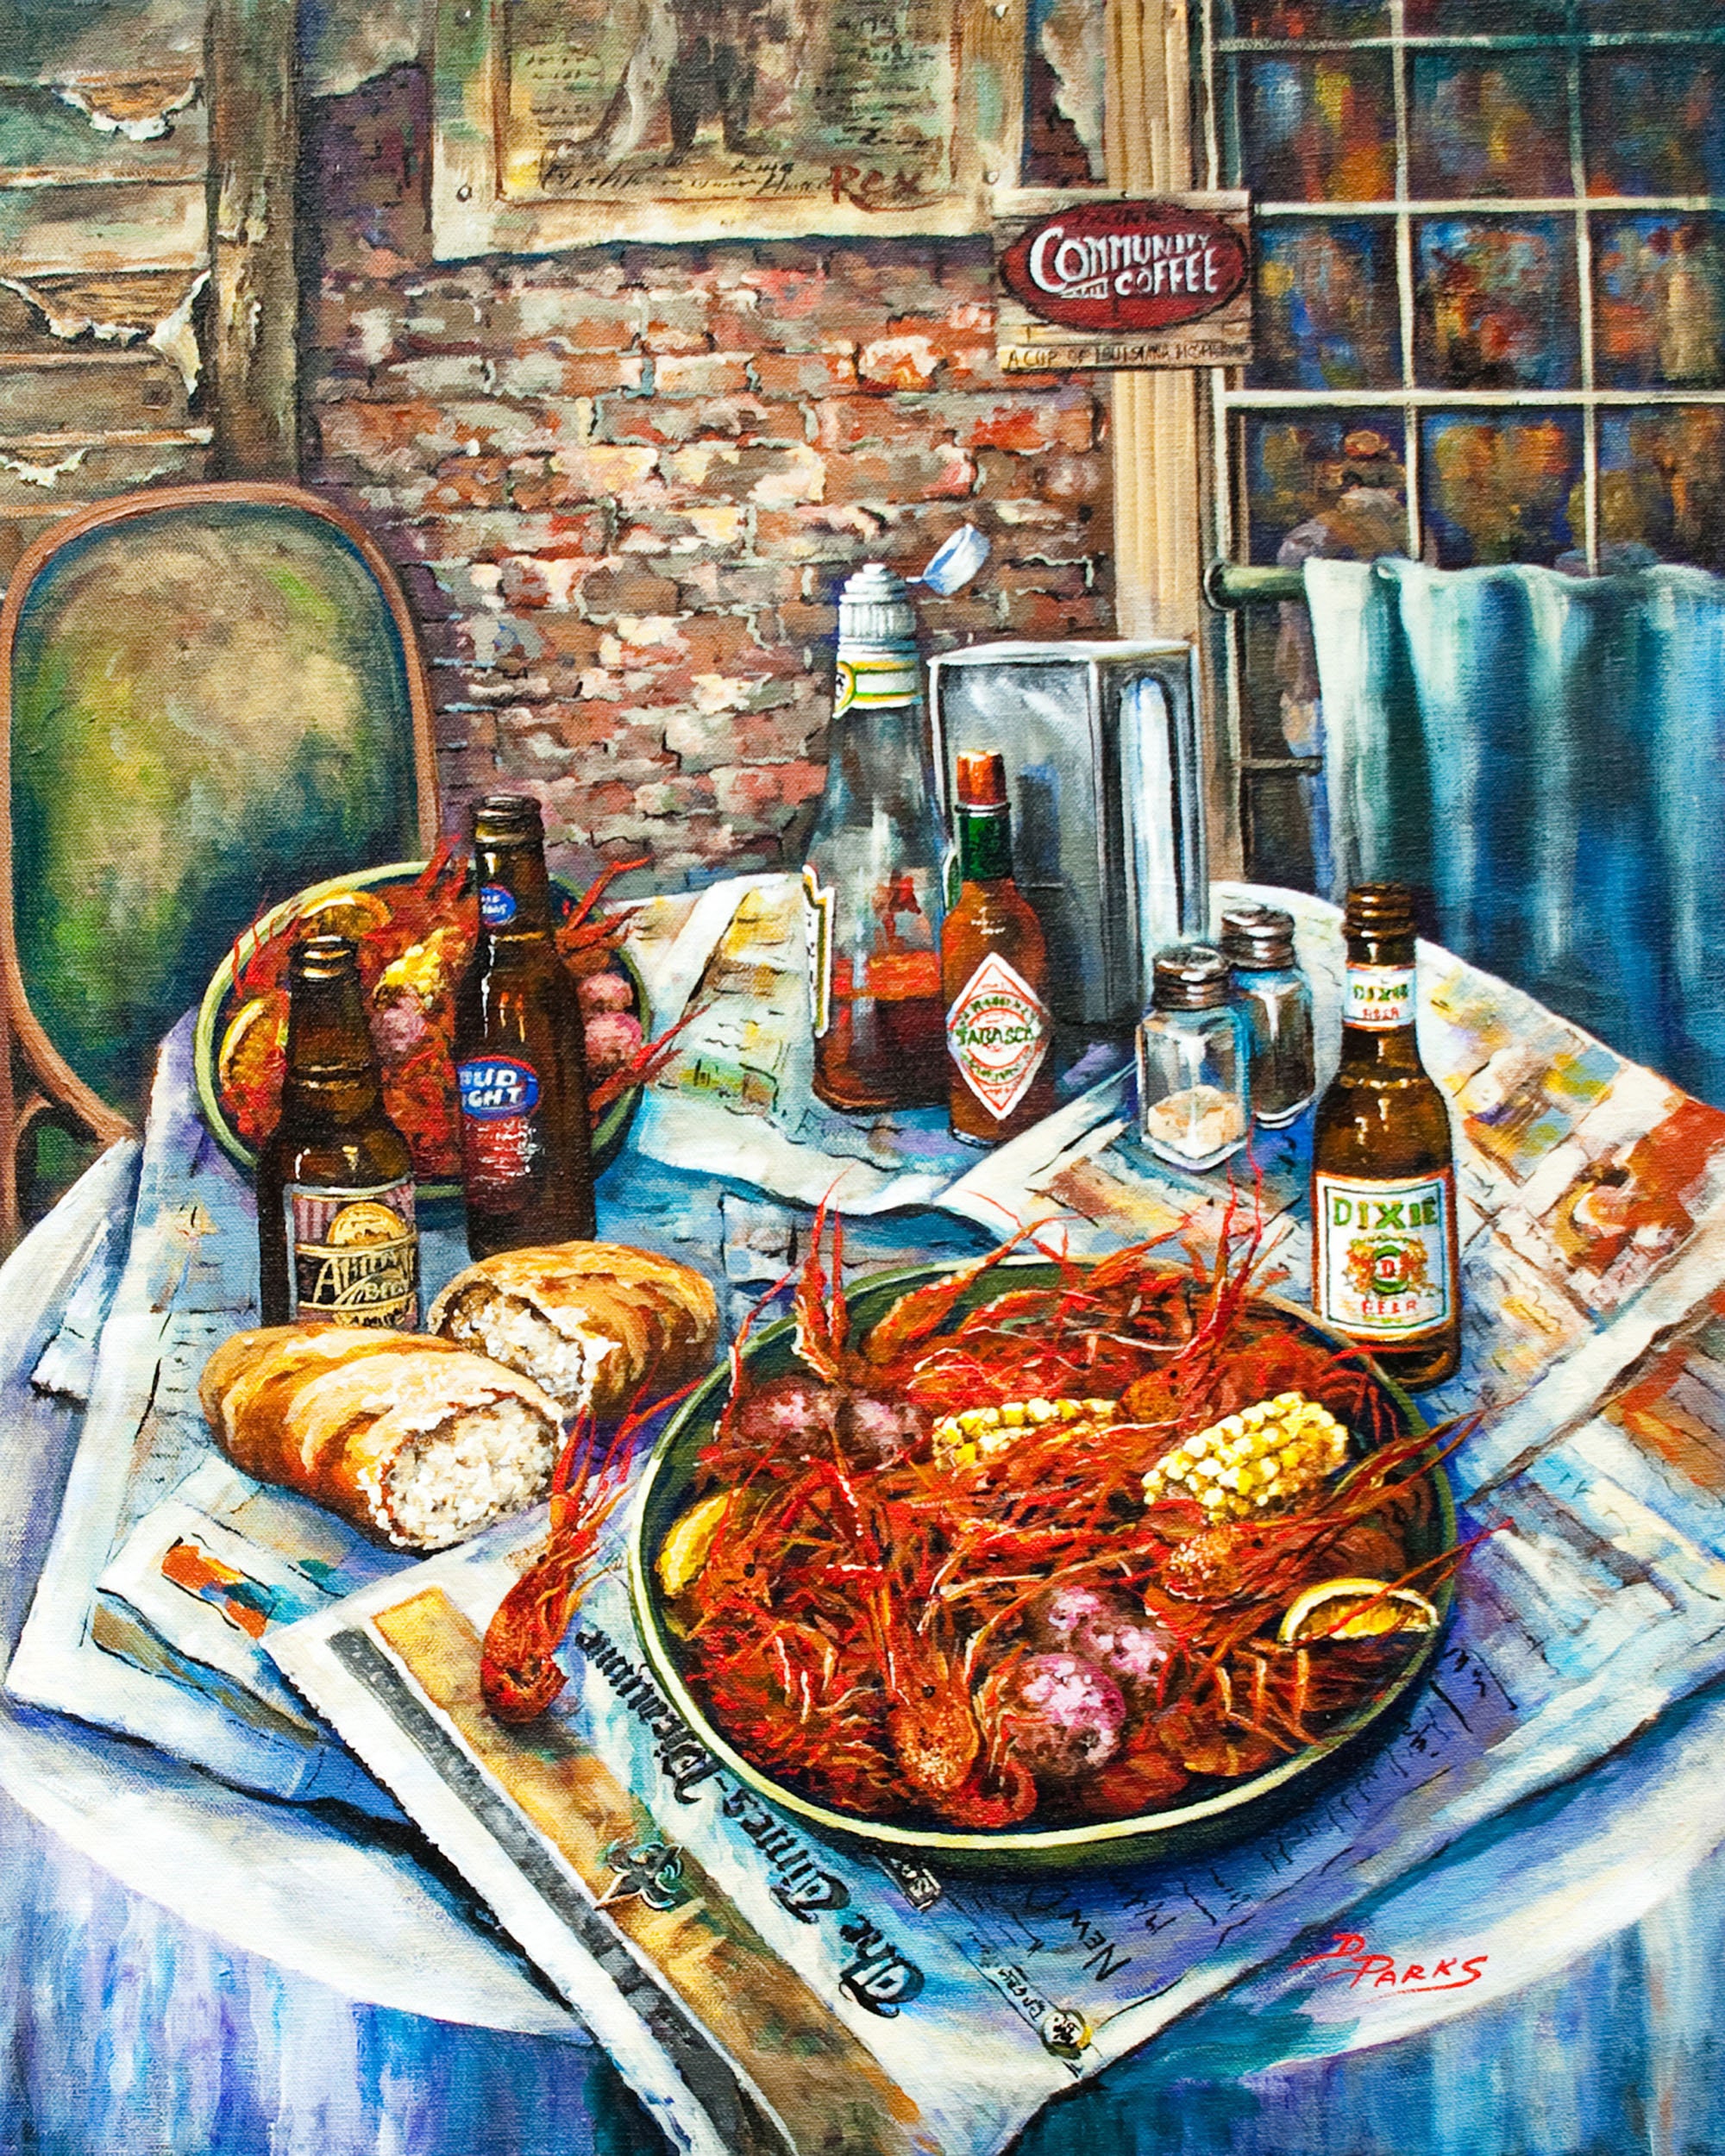 Crawfish Painting, New Orleans Boiled Seafood Art, Louisiana Table With Beer, Corn, - "Louisiana Saturday Night'